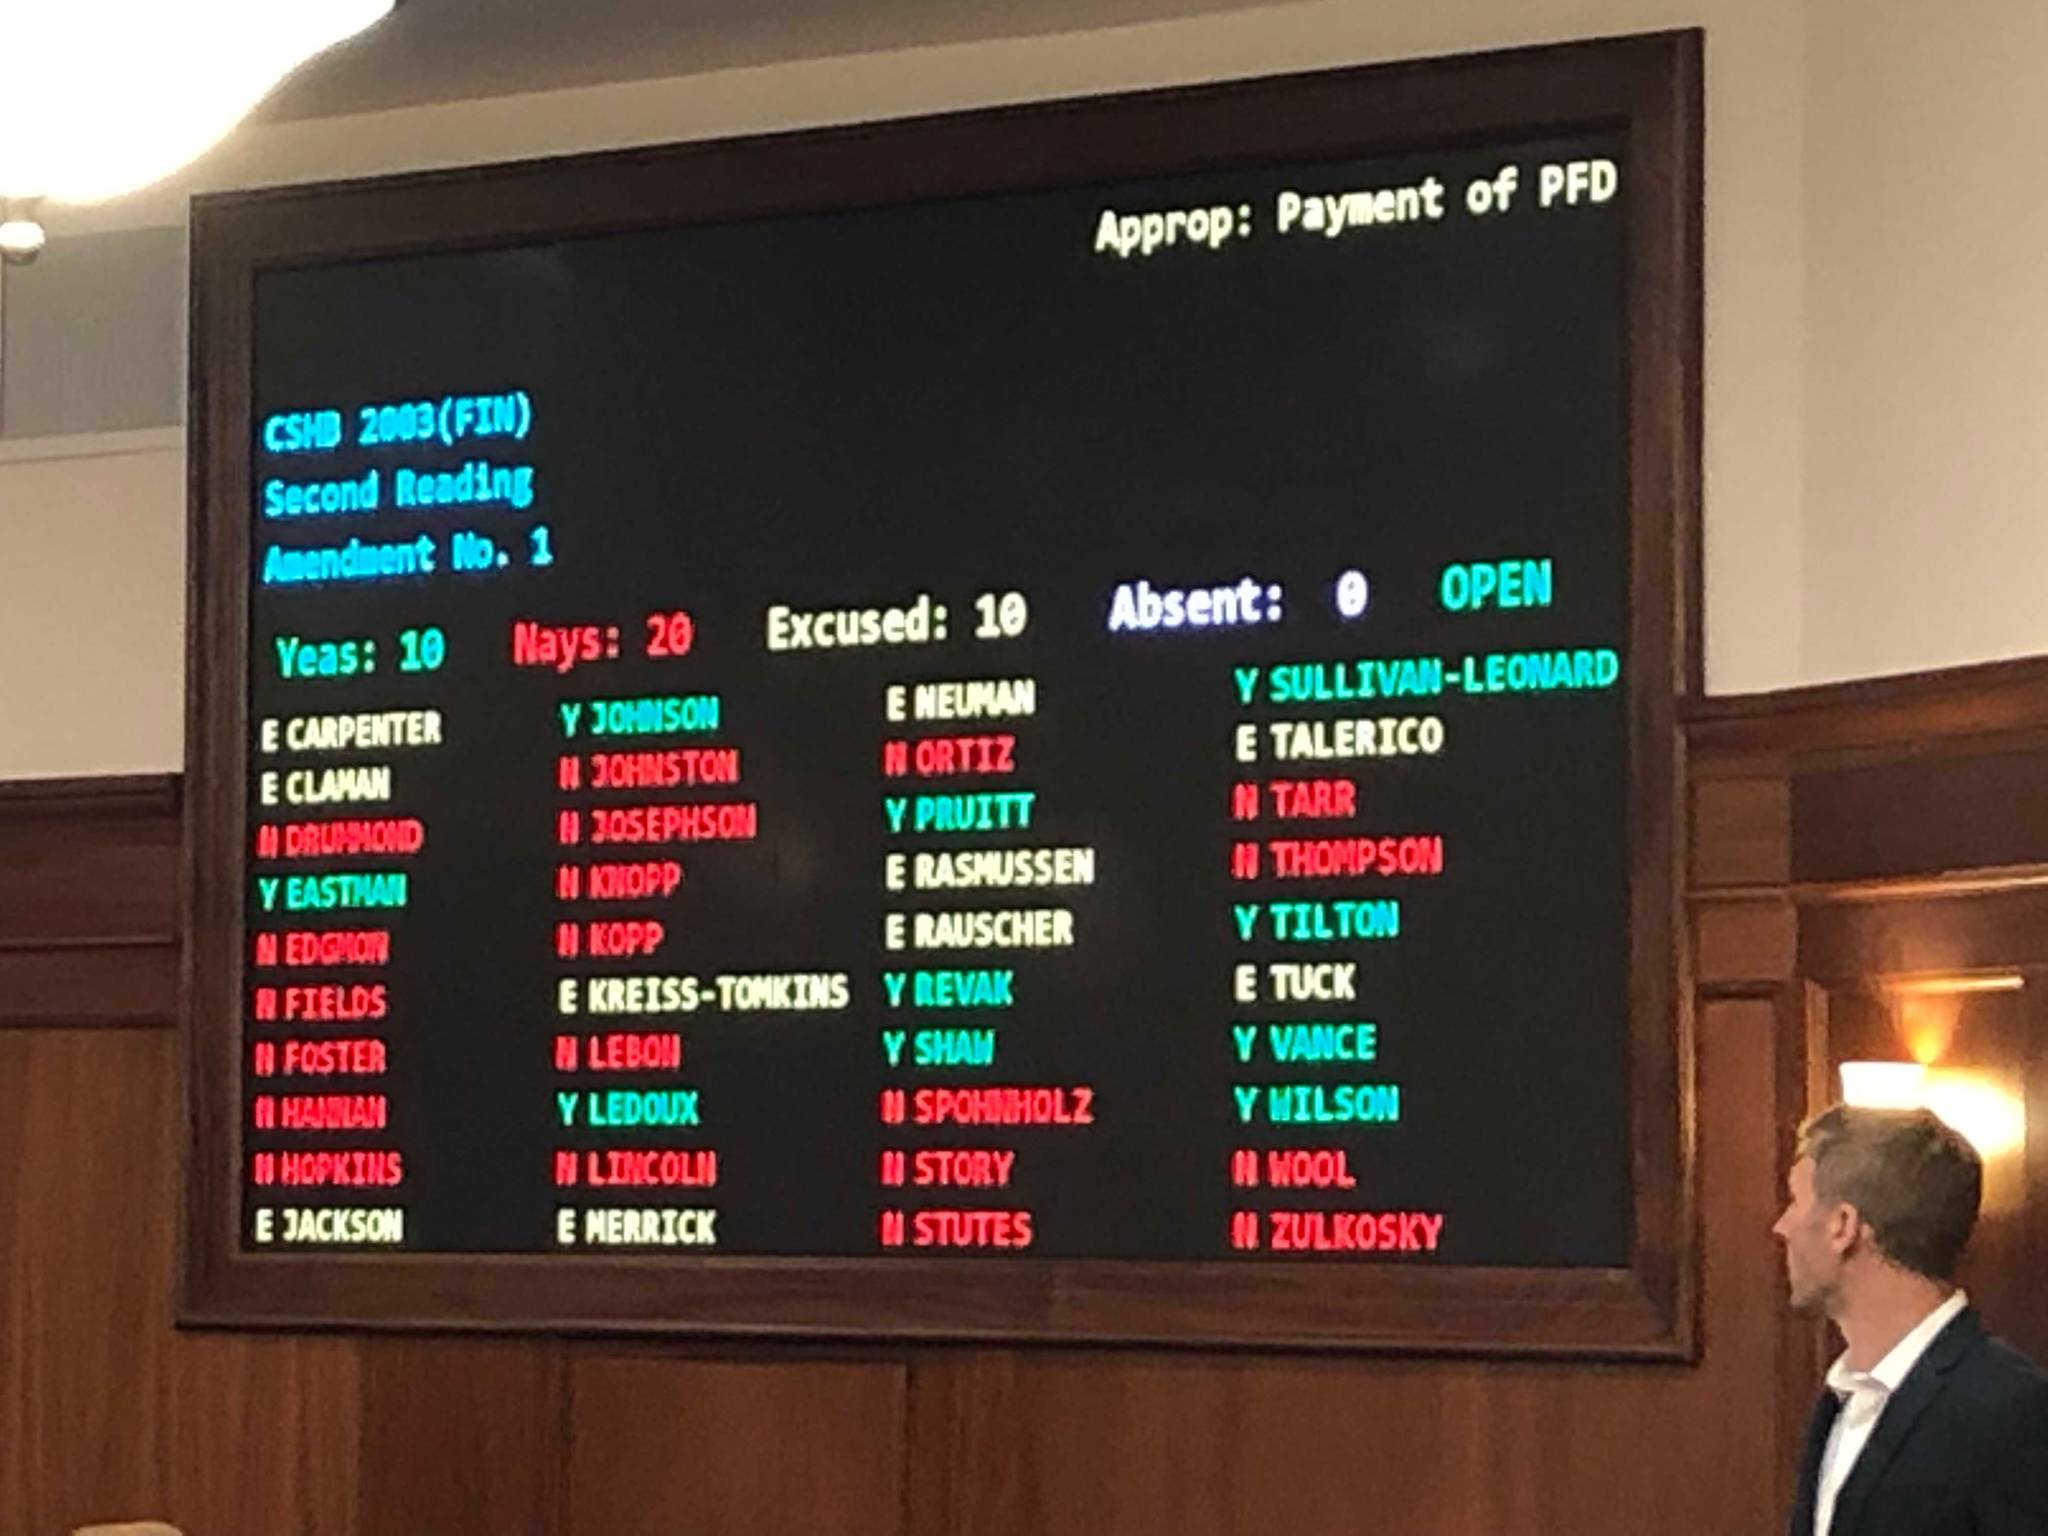 The board showing the vote for Eastman’s amendment to HB 2003 to add a $3,000 PFD on Thursday, July 25, 2019 (Peter Segall | Juneau Empire)